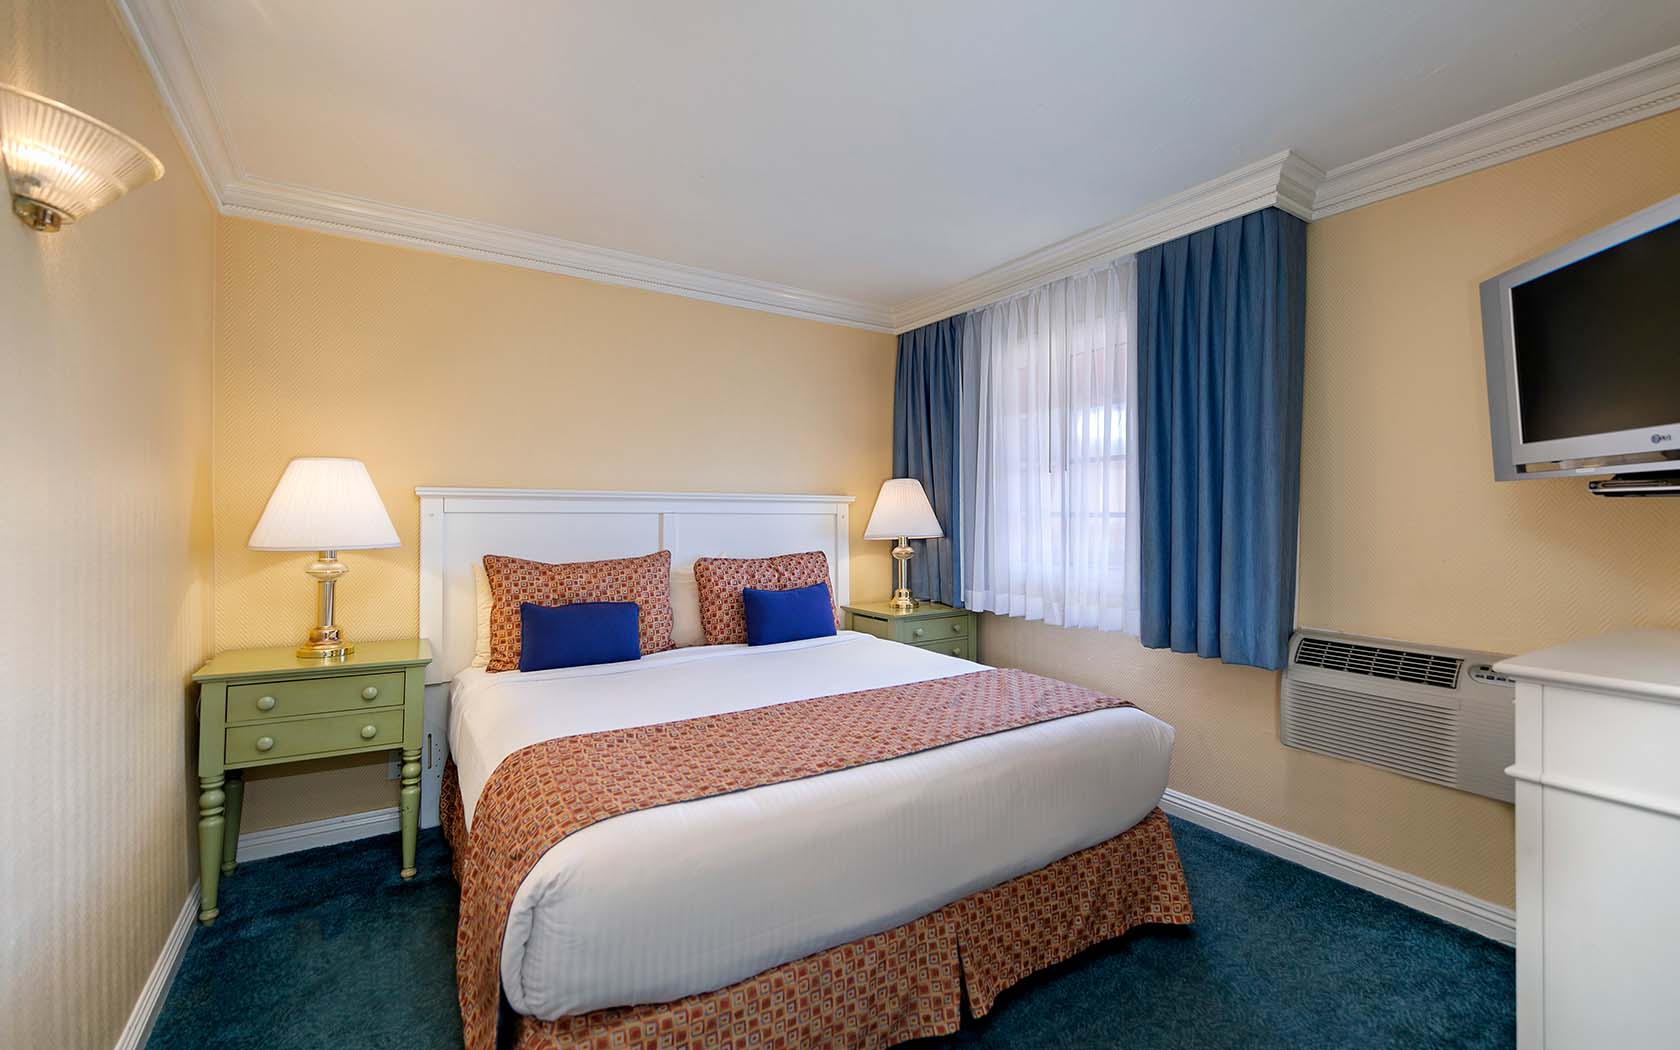 Comfy hotel bedroom designed in warm beige tones  and tailored to the needs of private and business travelers alike